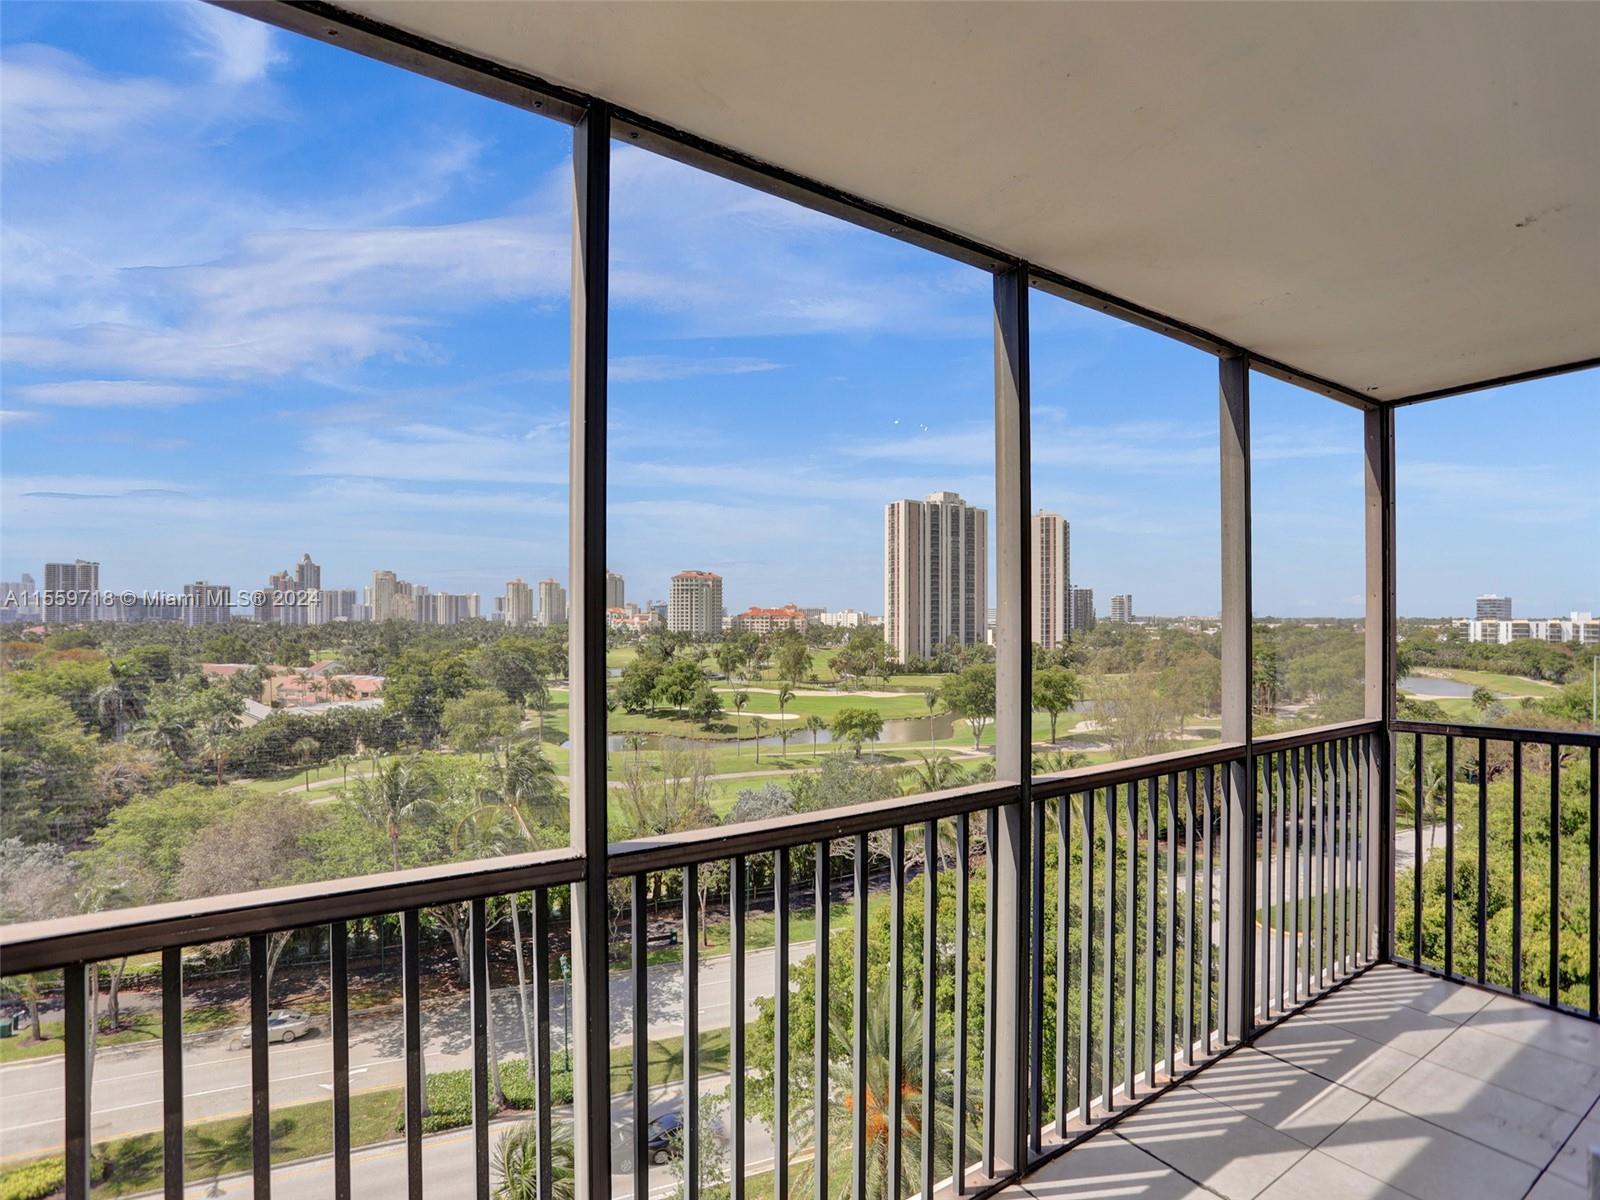 Breathtaking views of the Turnberry golf course and the 3 mile 'circle' of Aventura...bike, skate, w